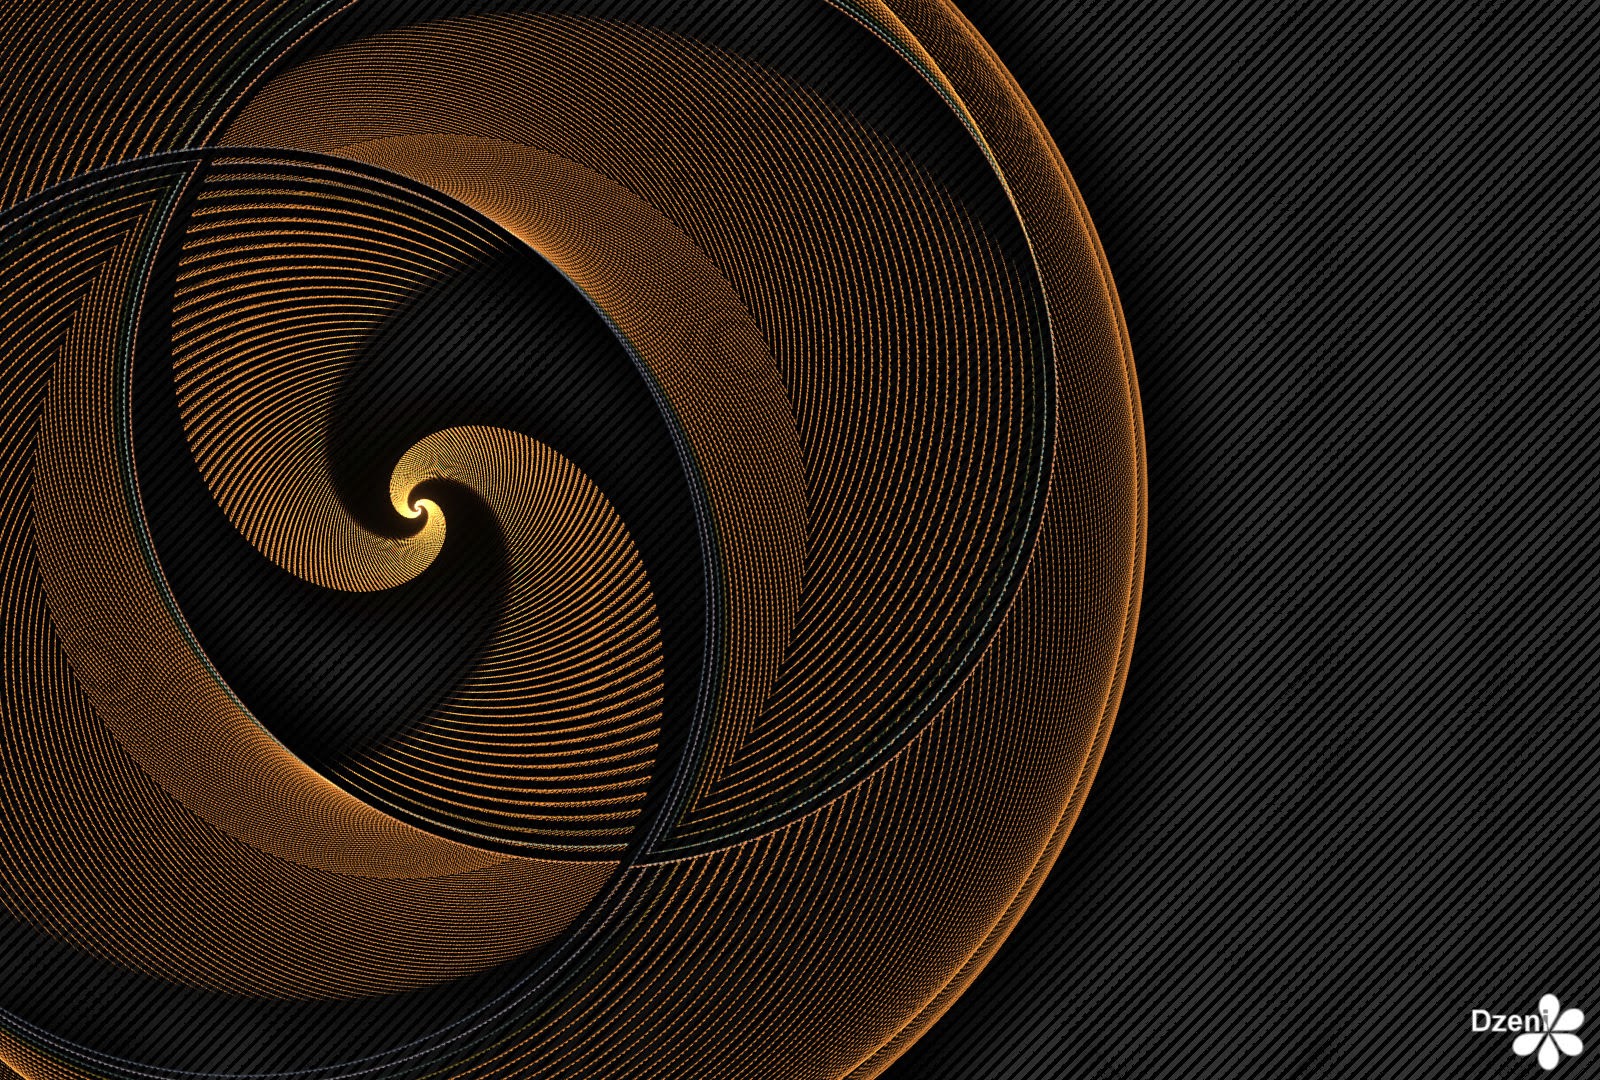 Read more about the article Koru Coin